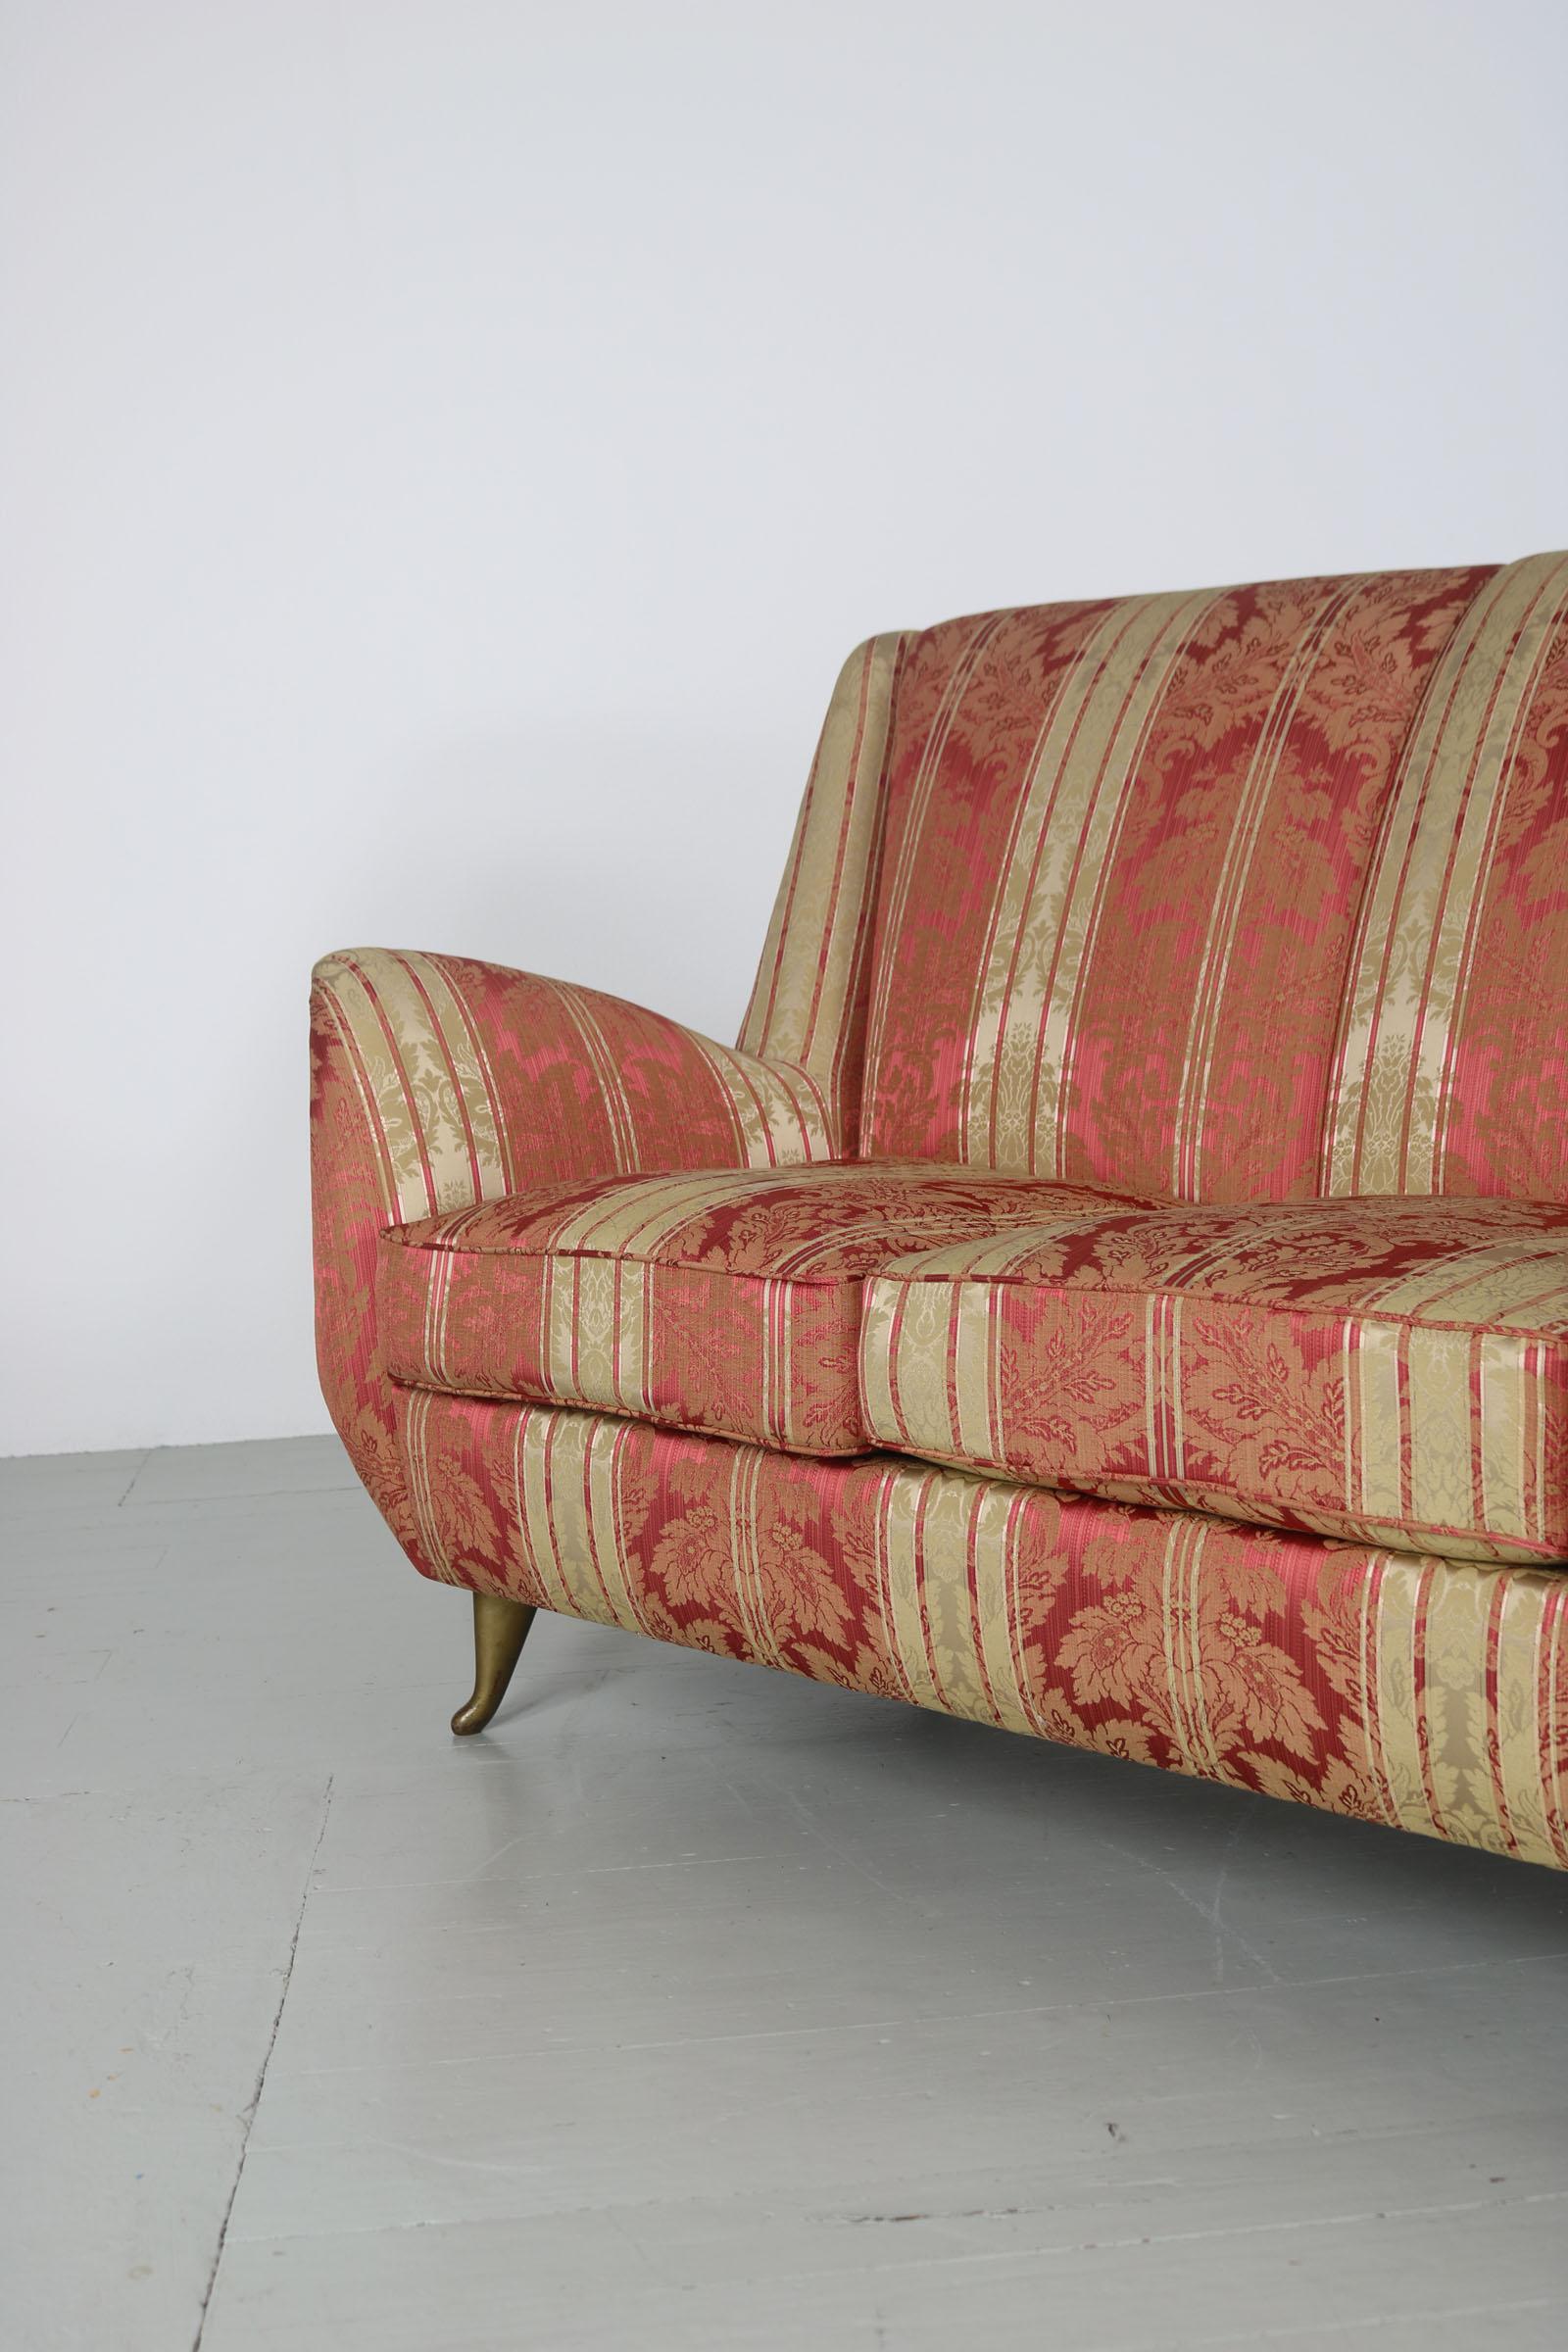 I.S.A. Sofa Set in Original Condition, Italy, 1950s For Sale 8